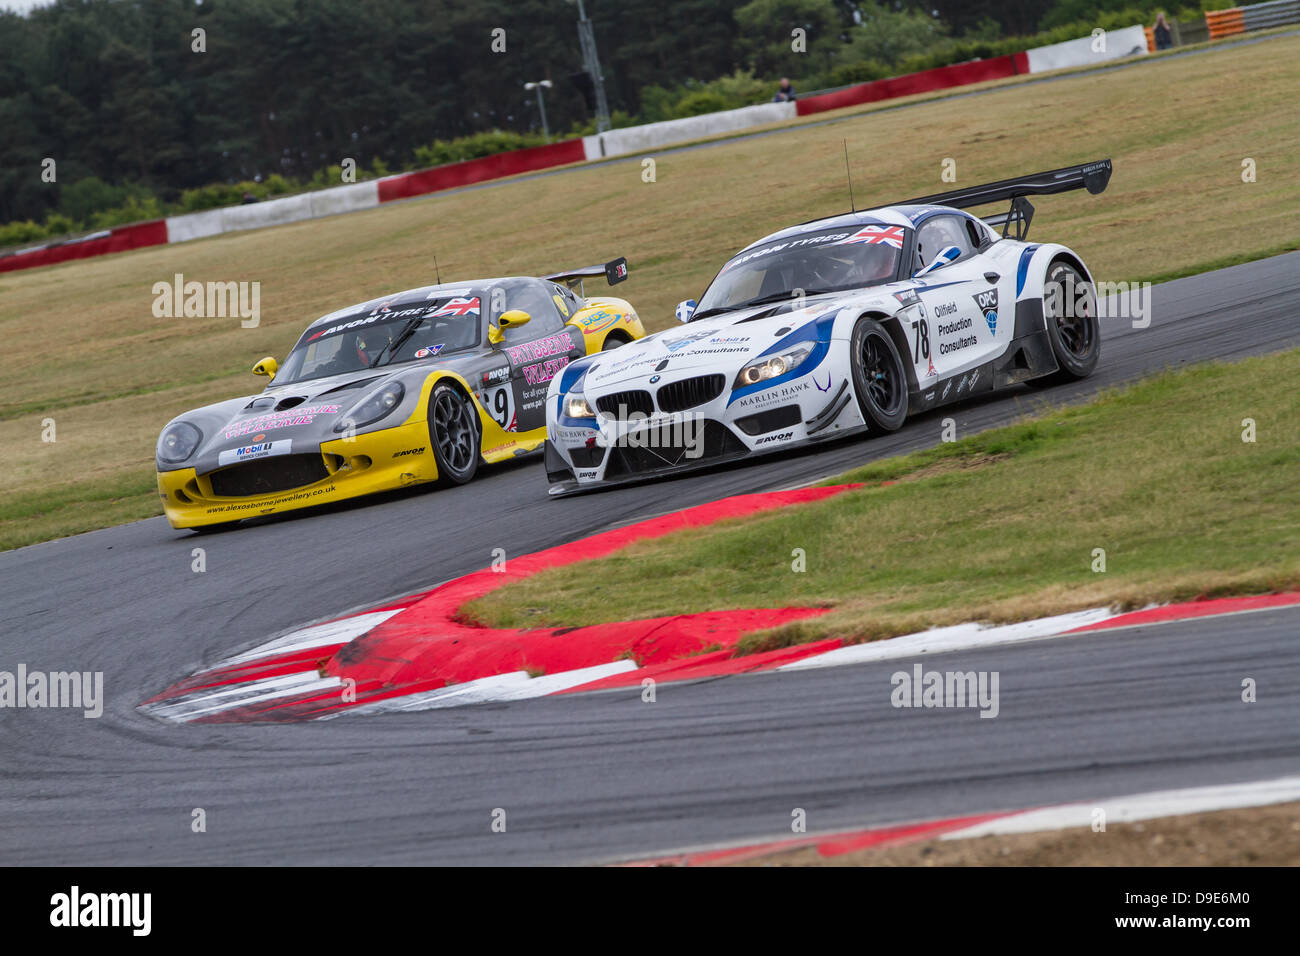 no 78 Barwell motorsport BMW lapping Ginetta g50 during race two at British GT Snetterton Stock Photo